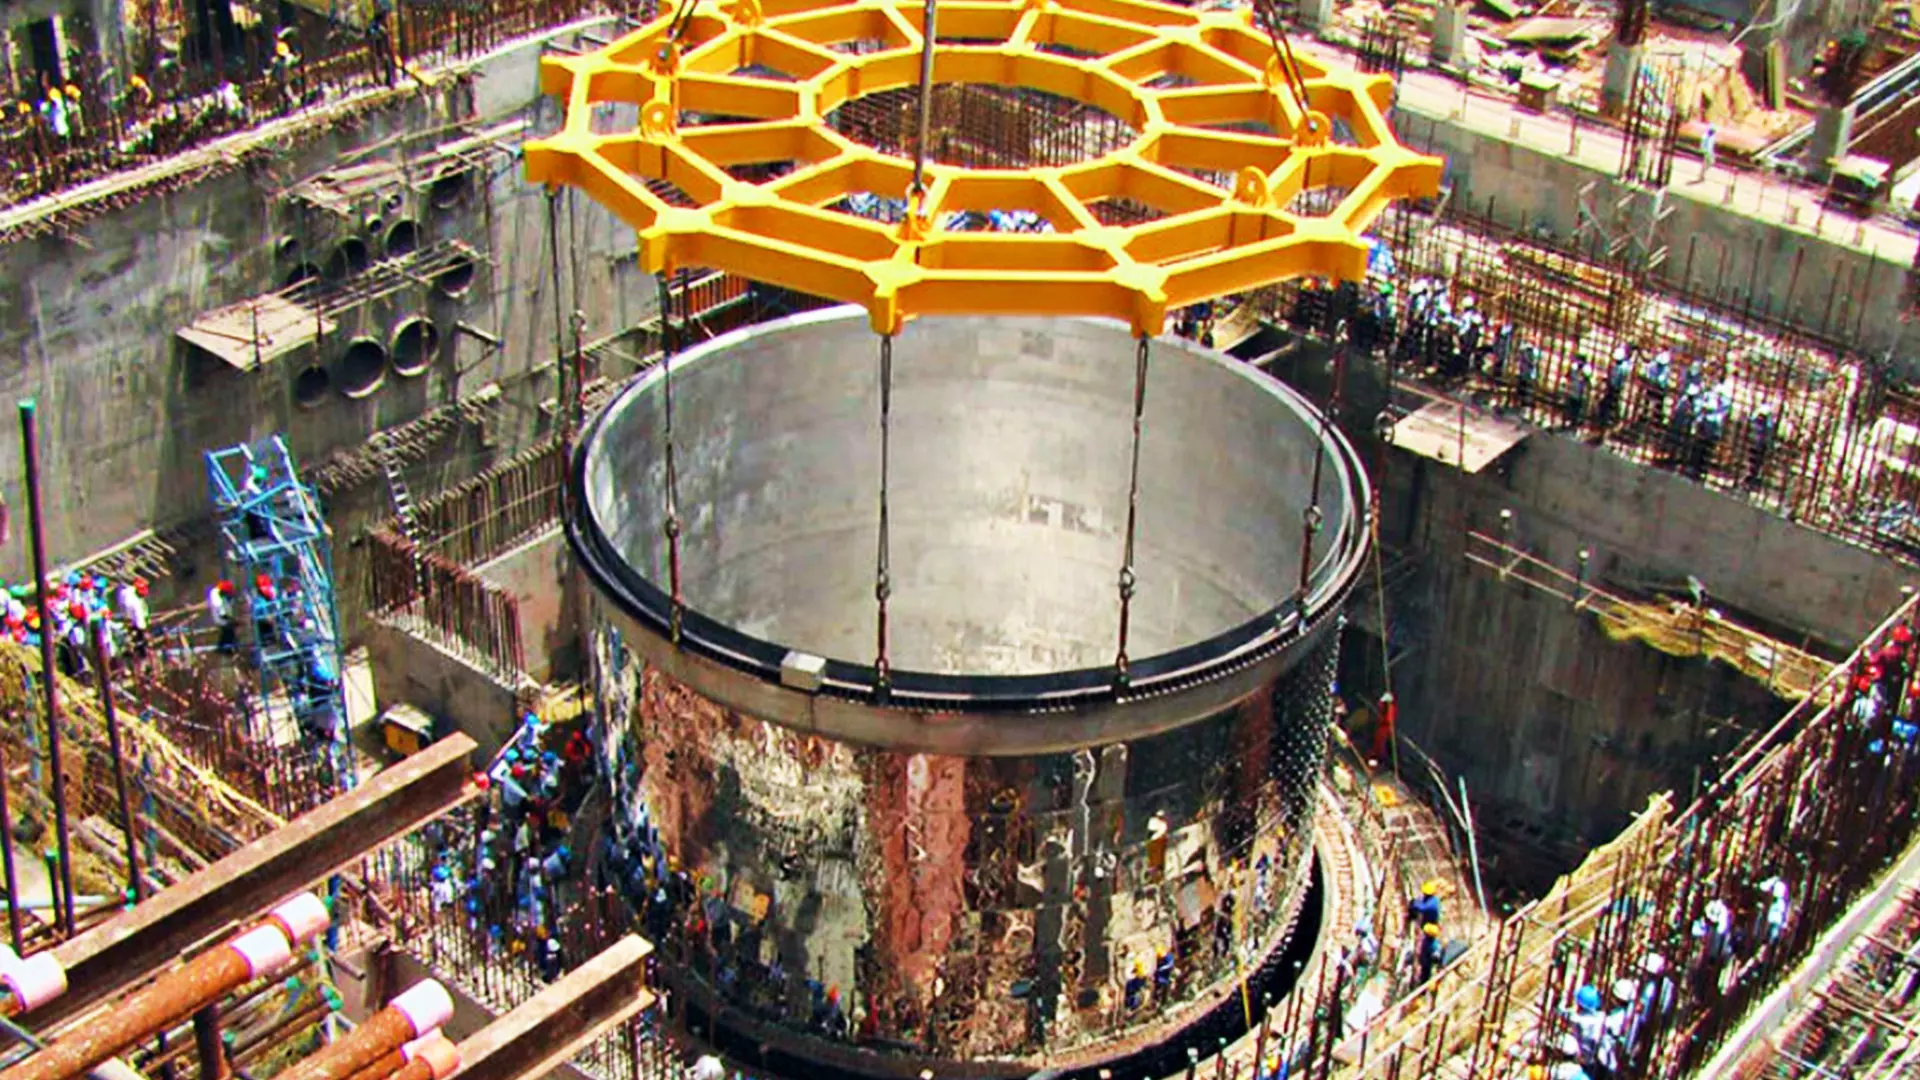 The plutonium-powered 500 MW Prototype Fast Breeder Reactor (PFBR) is set to become operational at Kalpakkam.